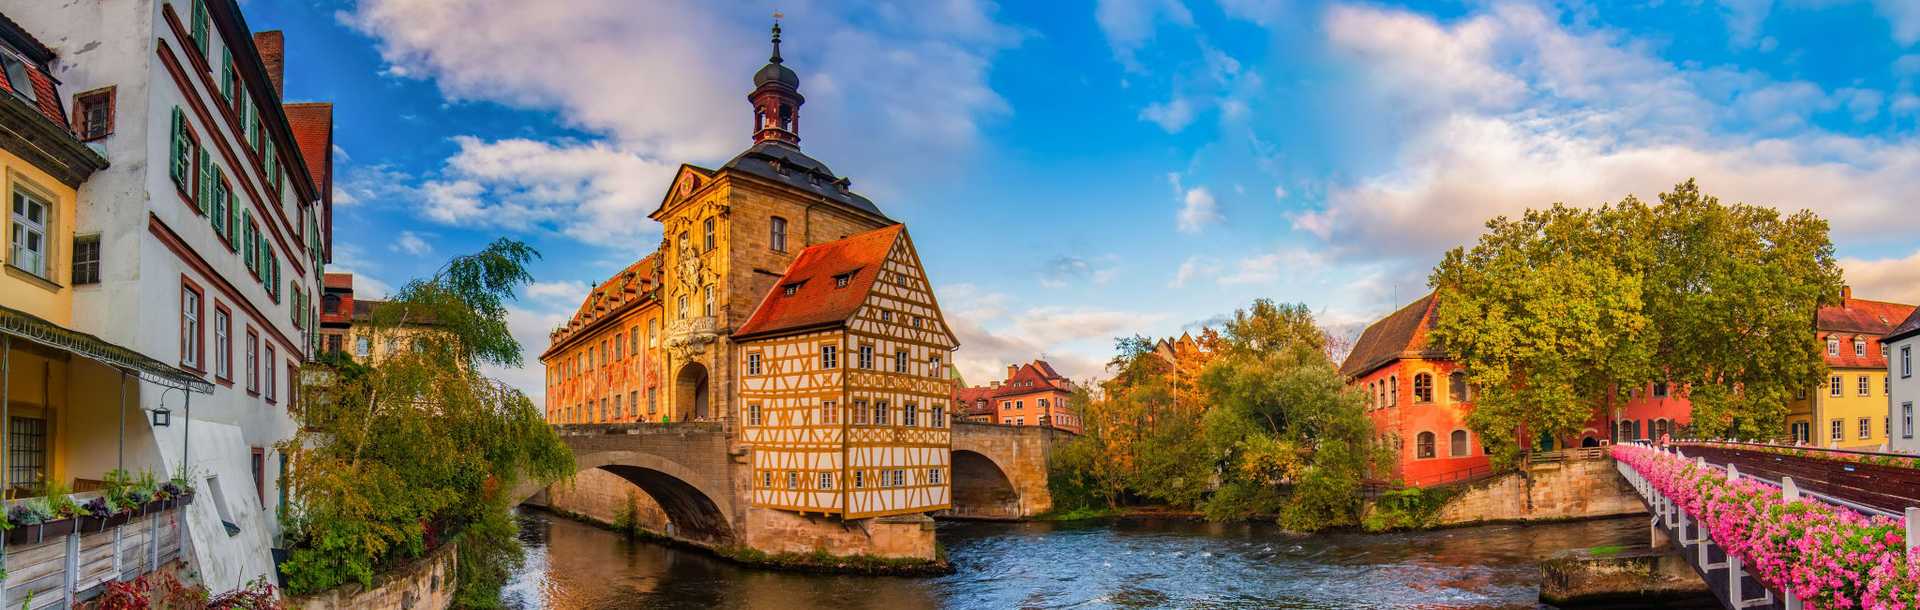 Panoramic view of historic city center of Bamberg, Germany. 